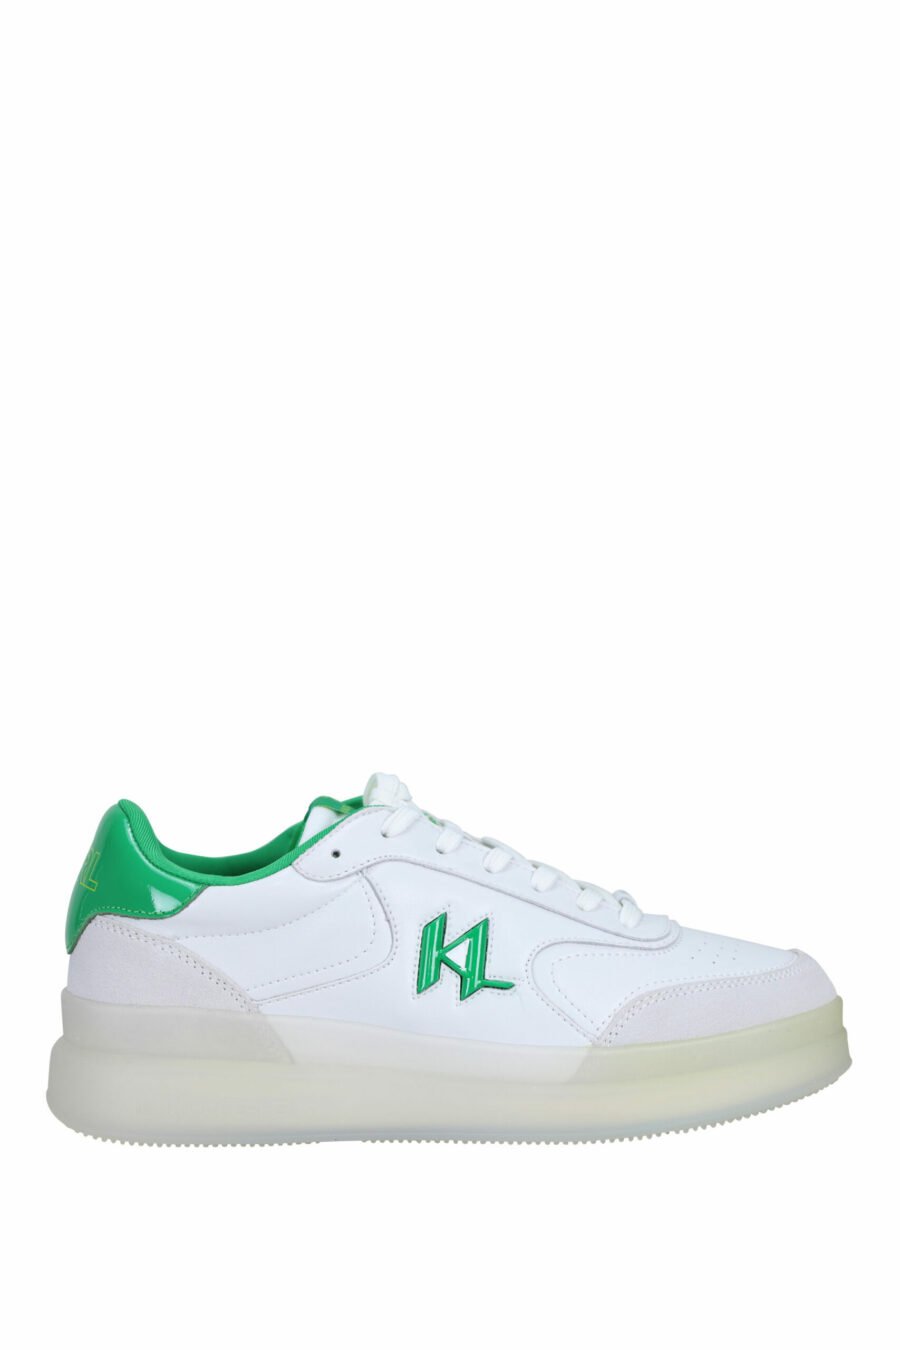 White and grey "brink" trainers with green details - 5059529294495 scaled